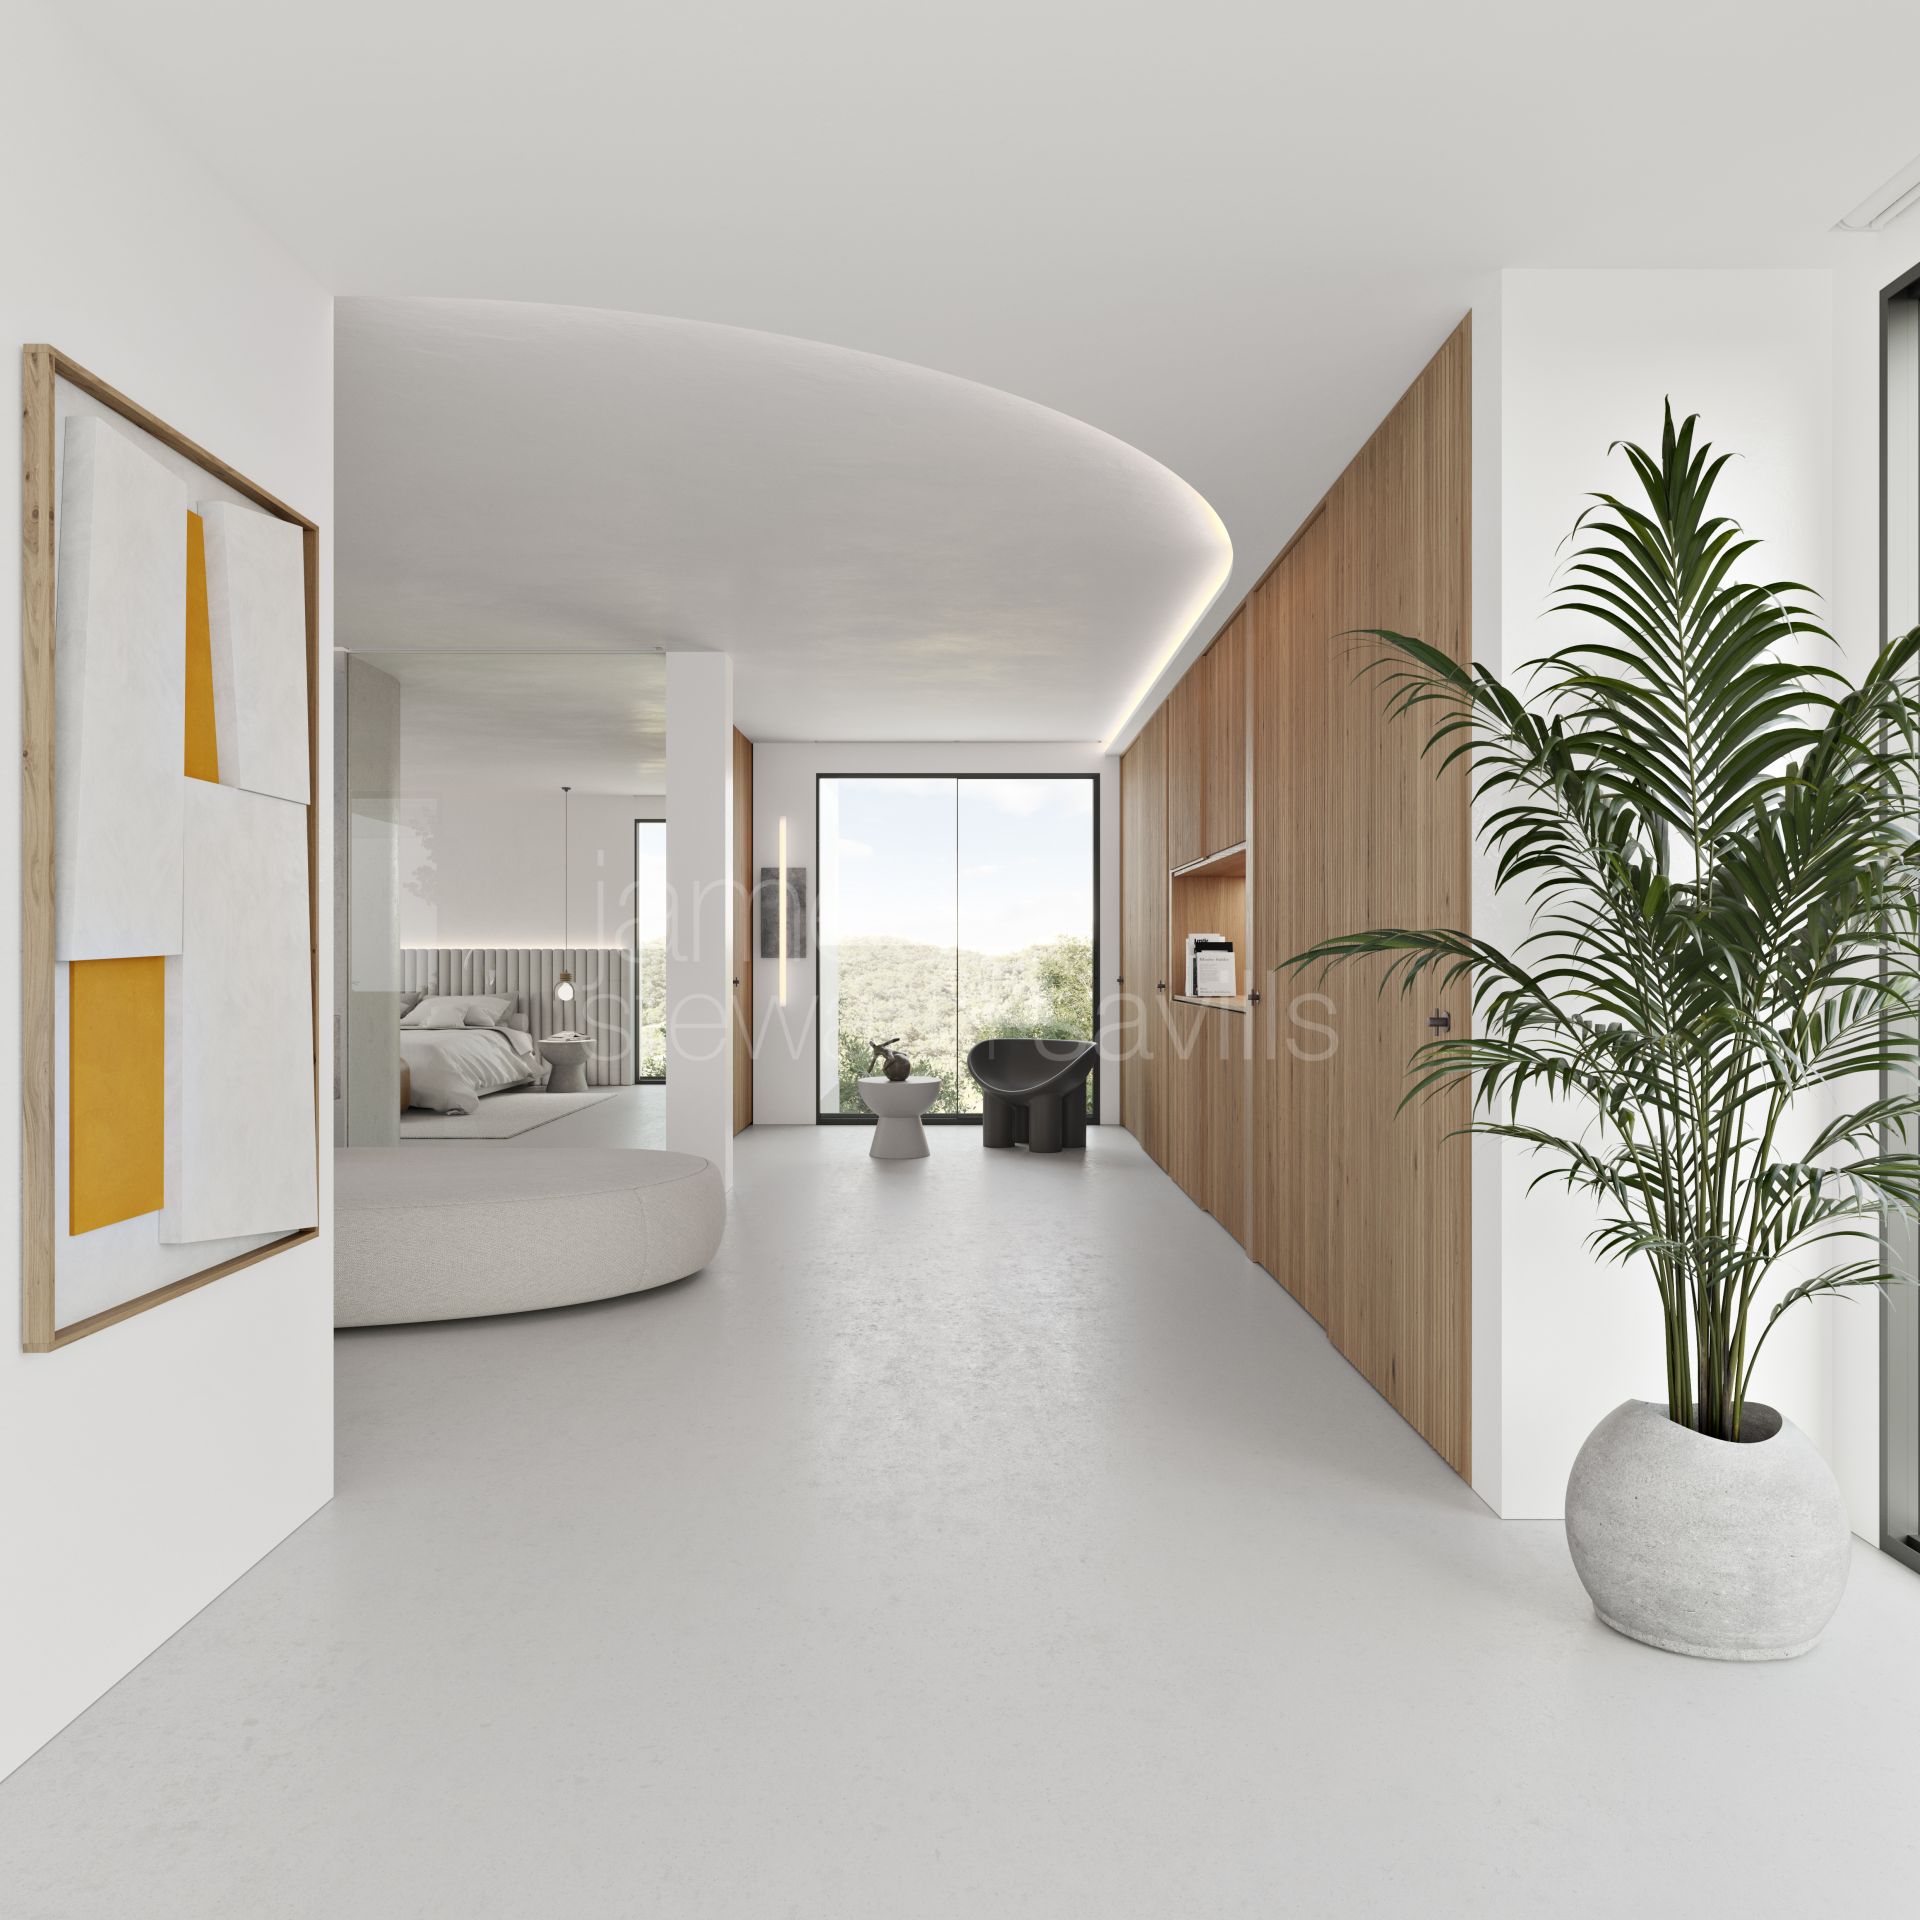 Fabulous new project of futuristic apartments next to Sotogrande - two bedroom prices from € 795,000